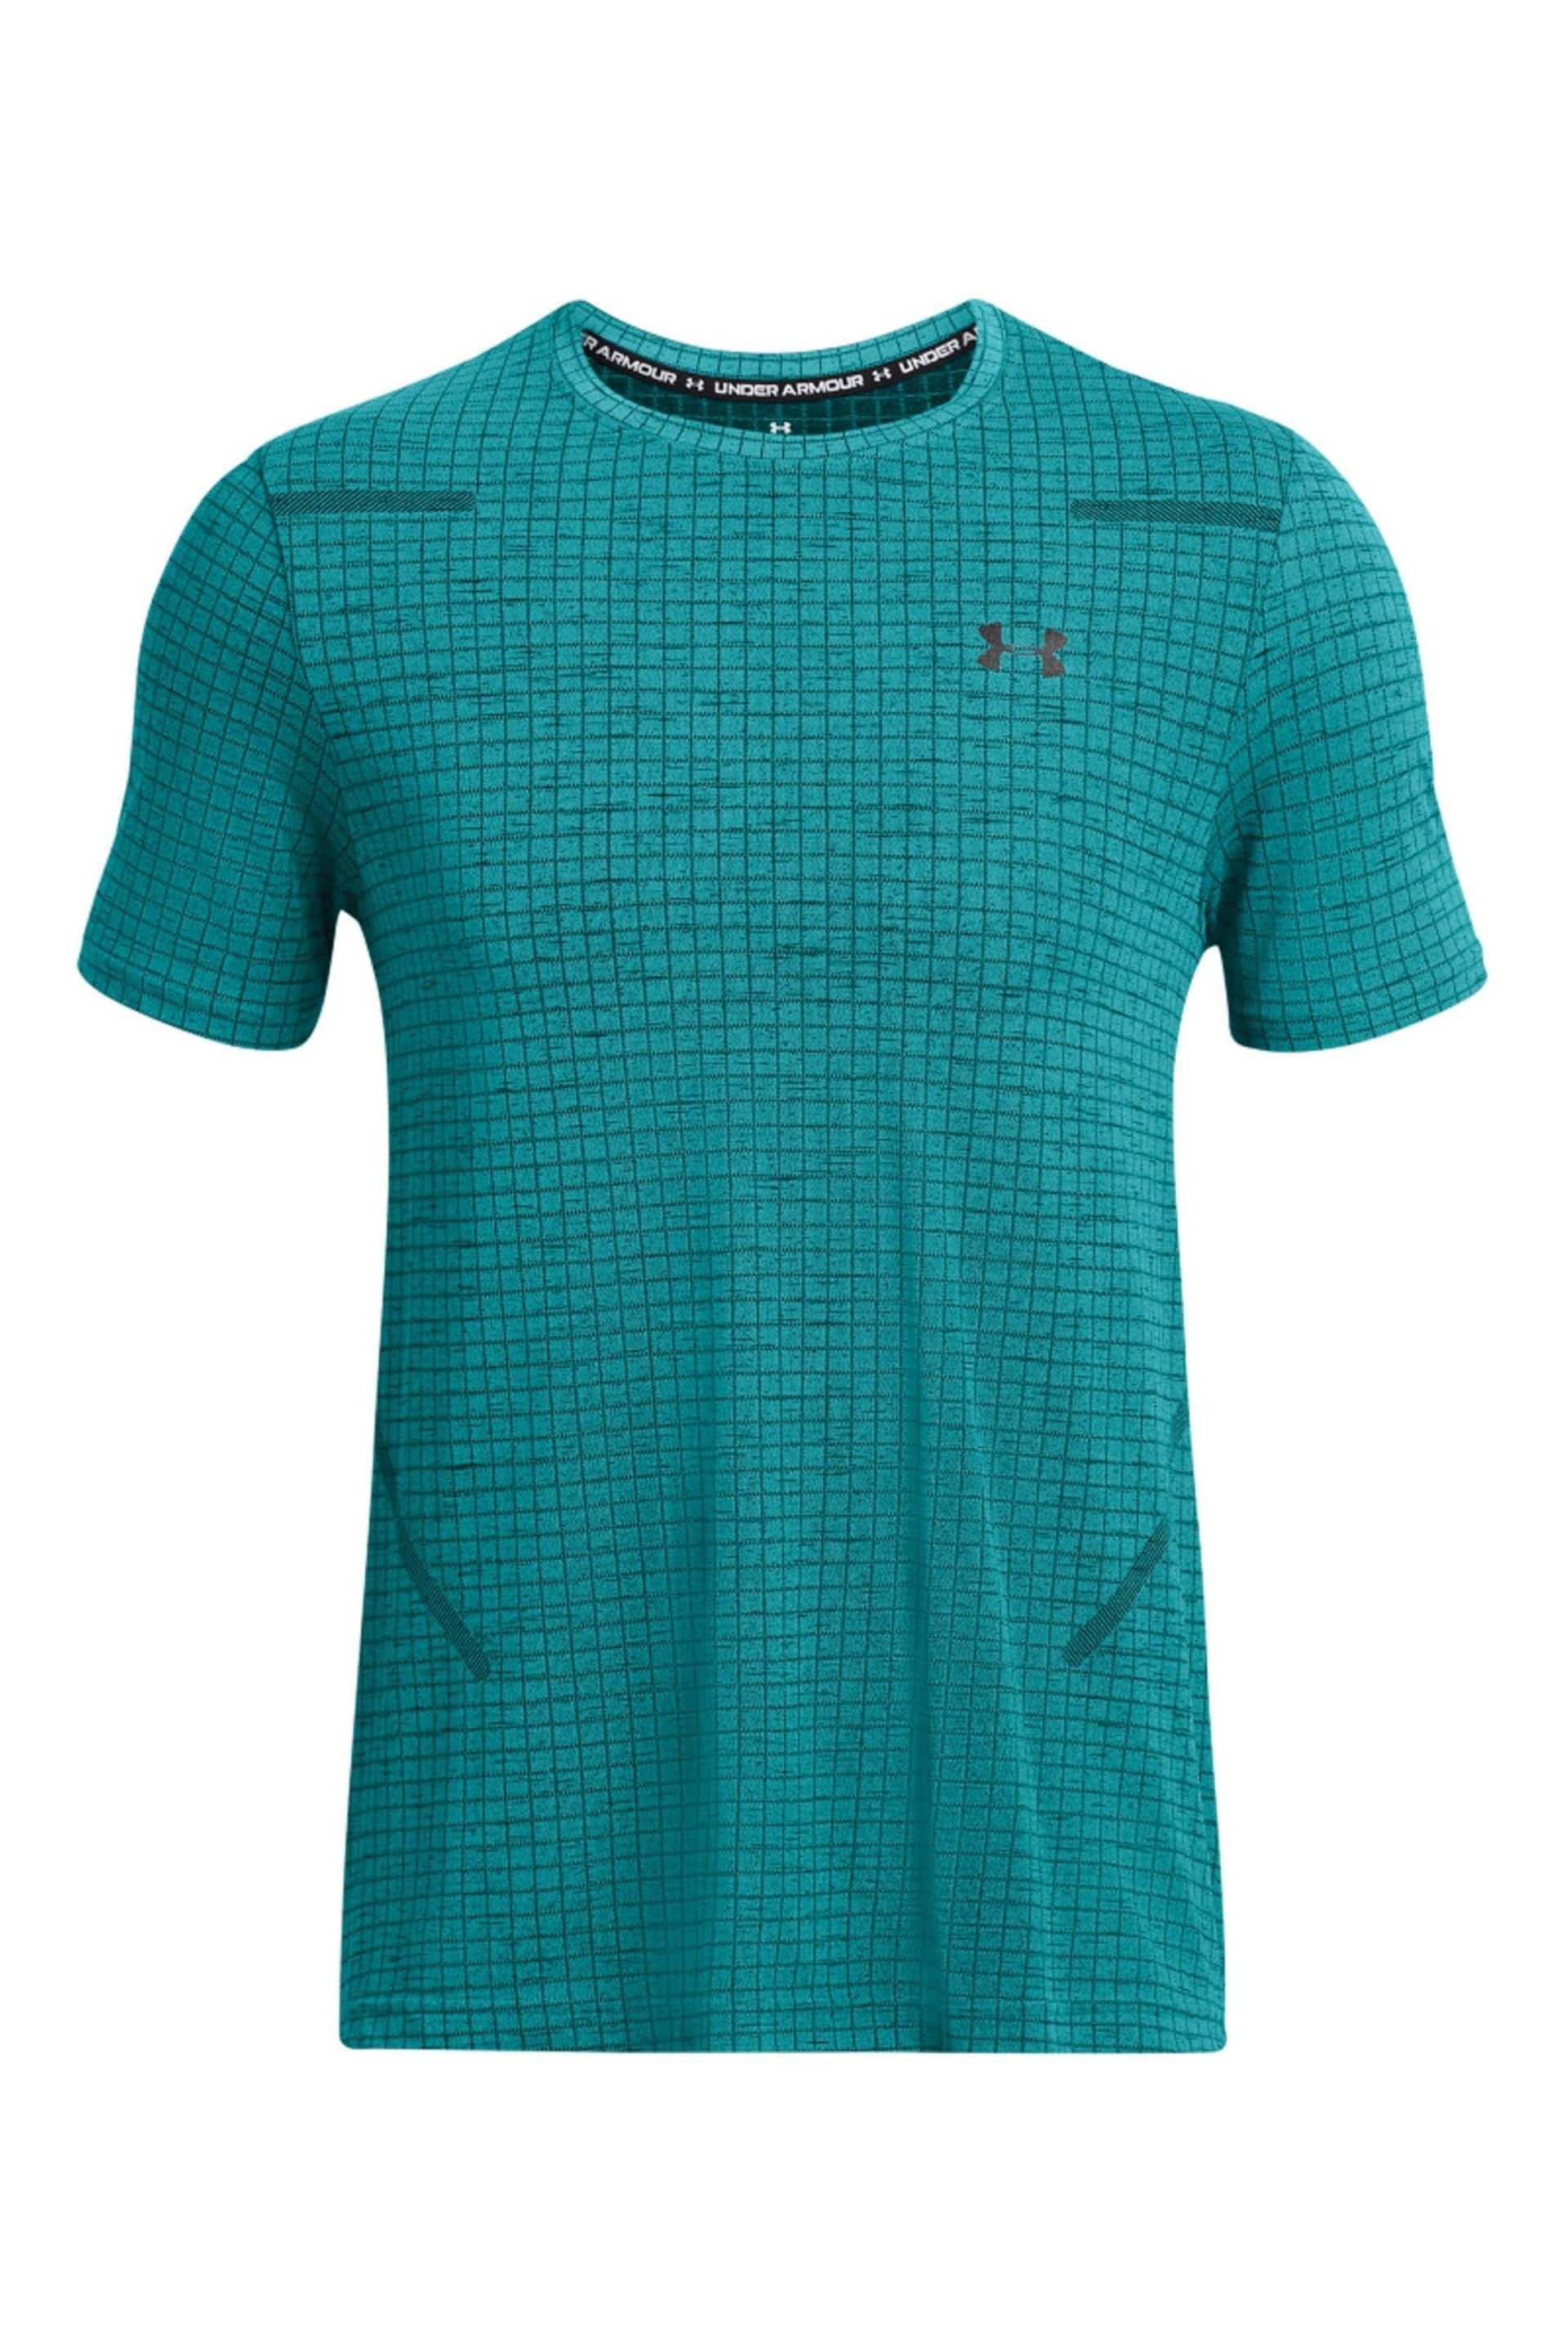 Under Armour Teal Blue Vanish Seamless Short Sleeve T-Shirt - Image 7 of 8